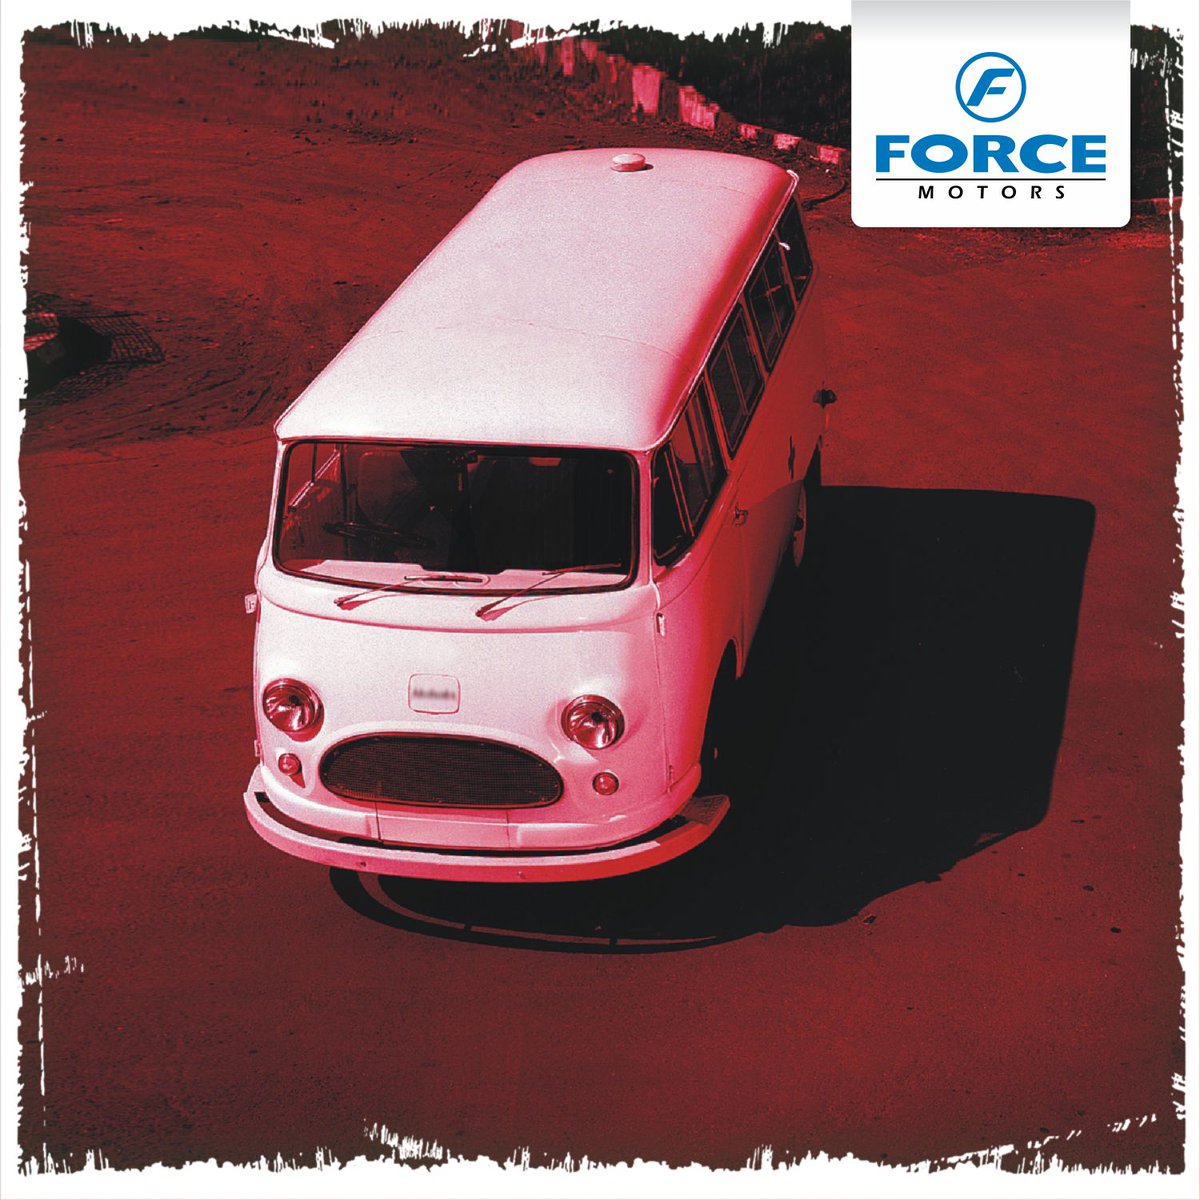 Force Motors Ltd A Twitter Dyk After The Inauguration Of The